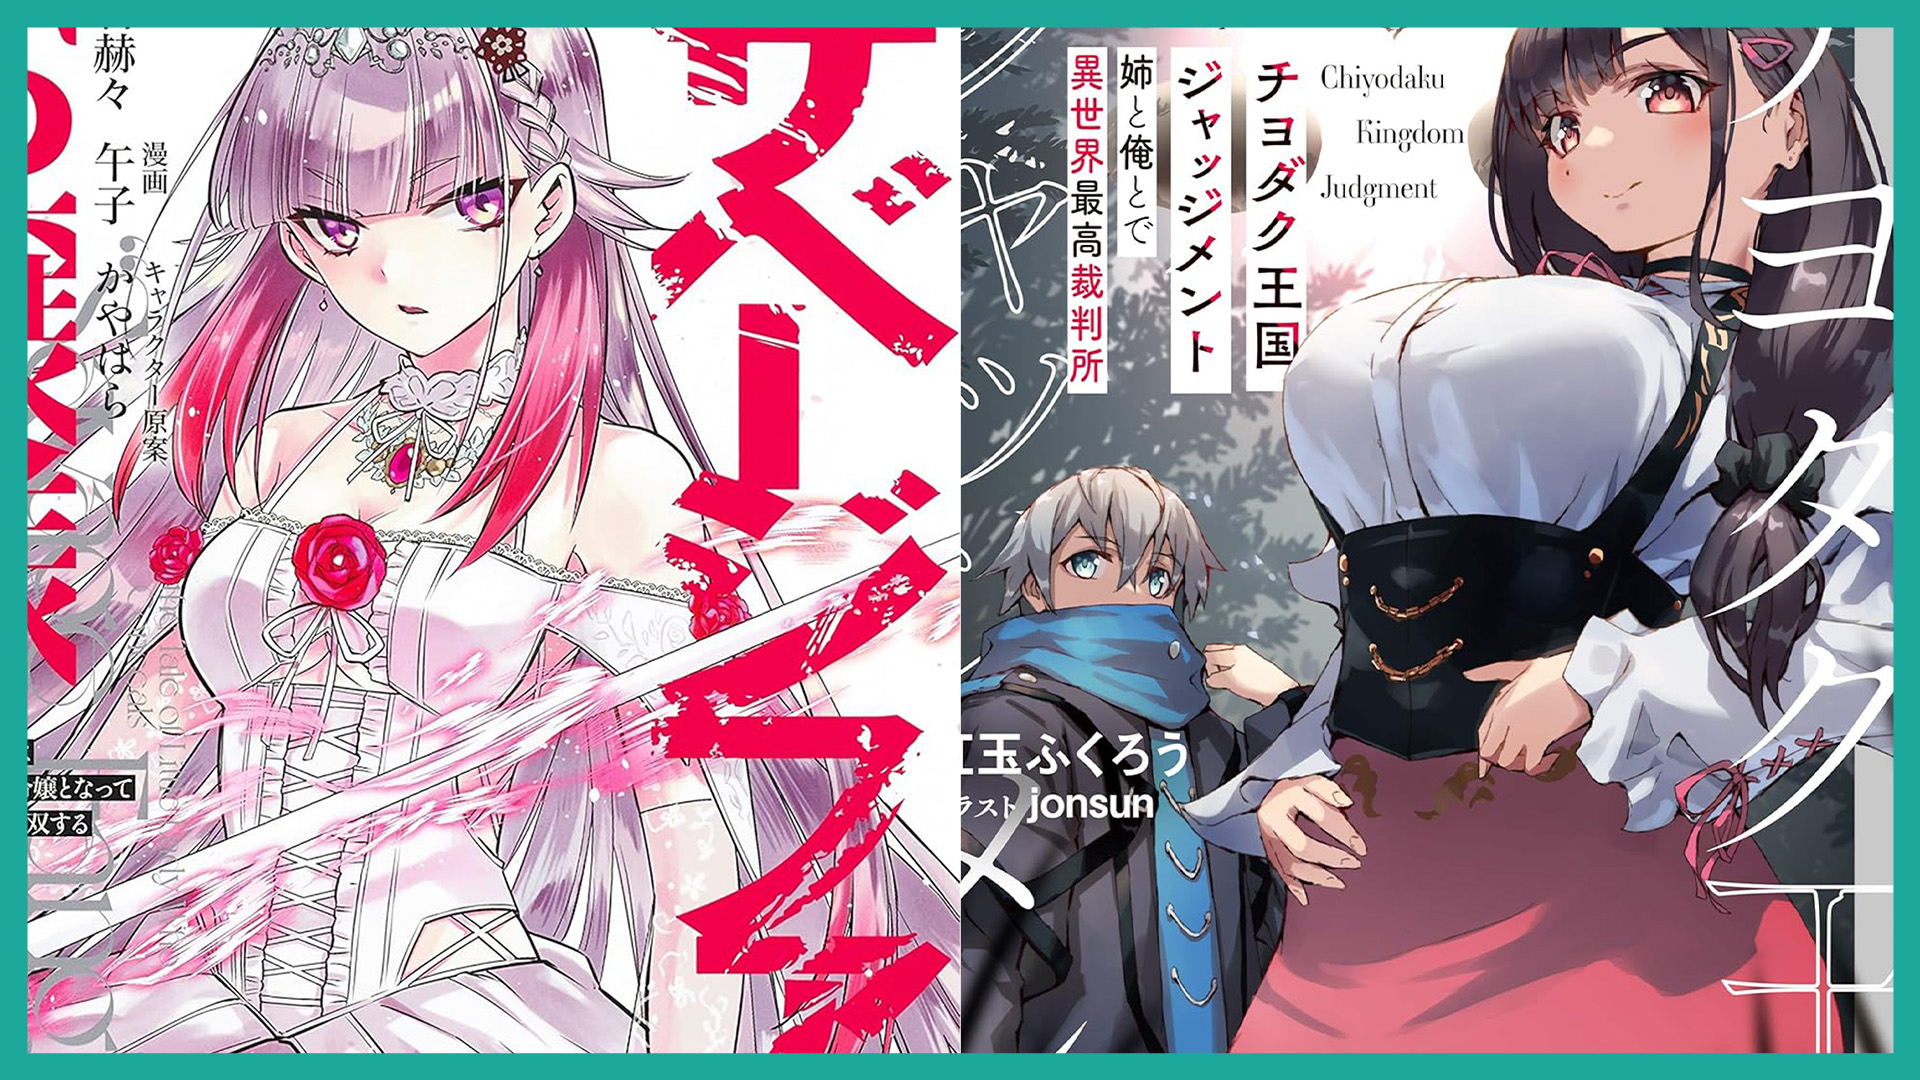 Yen Press Shares Nine New Acquisitions for Titles Releasing This Summer; Including Miss Savage Fang, The Trials of Chiyodaku, and More